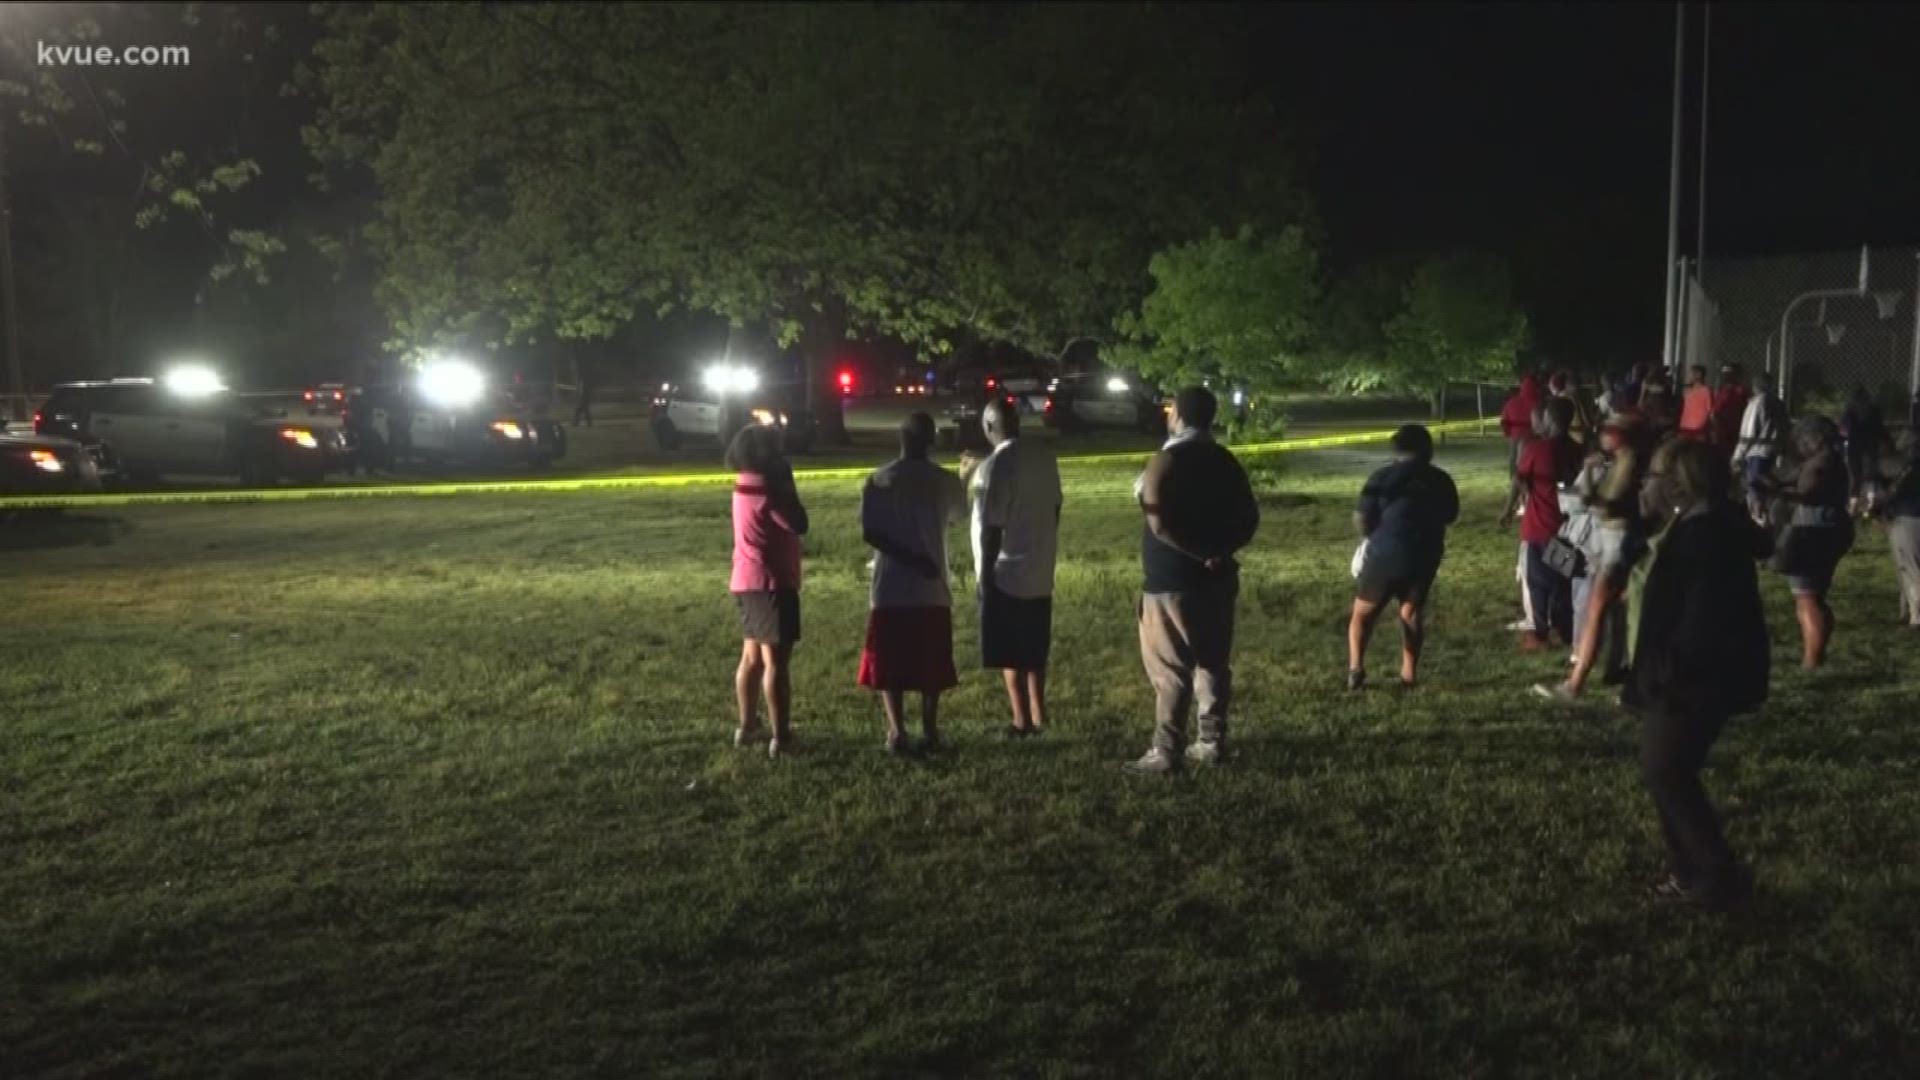 One man was reportedly found dead with a gunshot wound near the park at about 10:45 p.m. Tuesday night. Police haven't released many details, but several people showed up at the park after it happened.